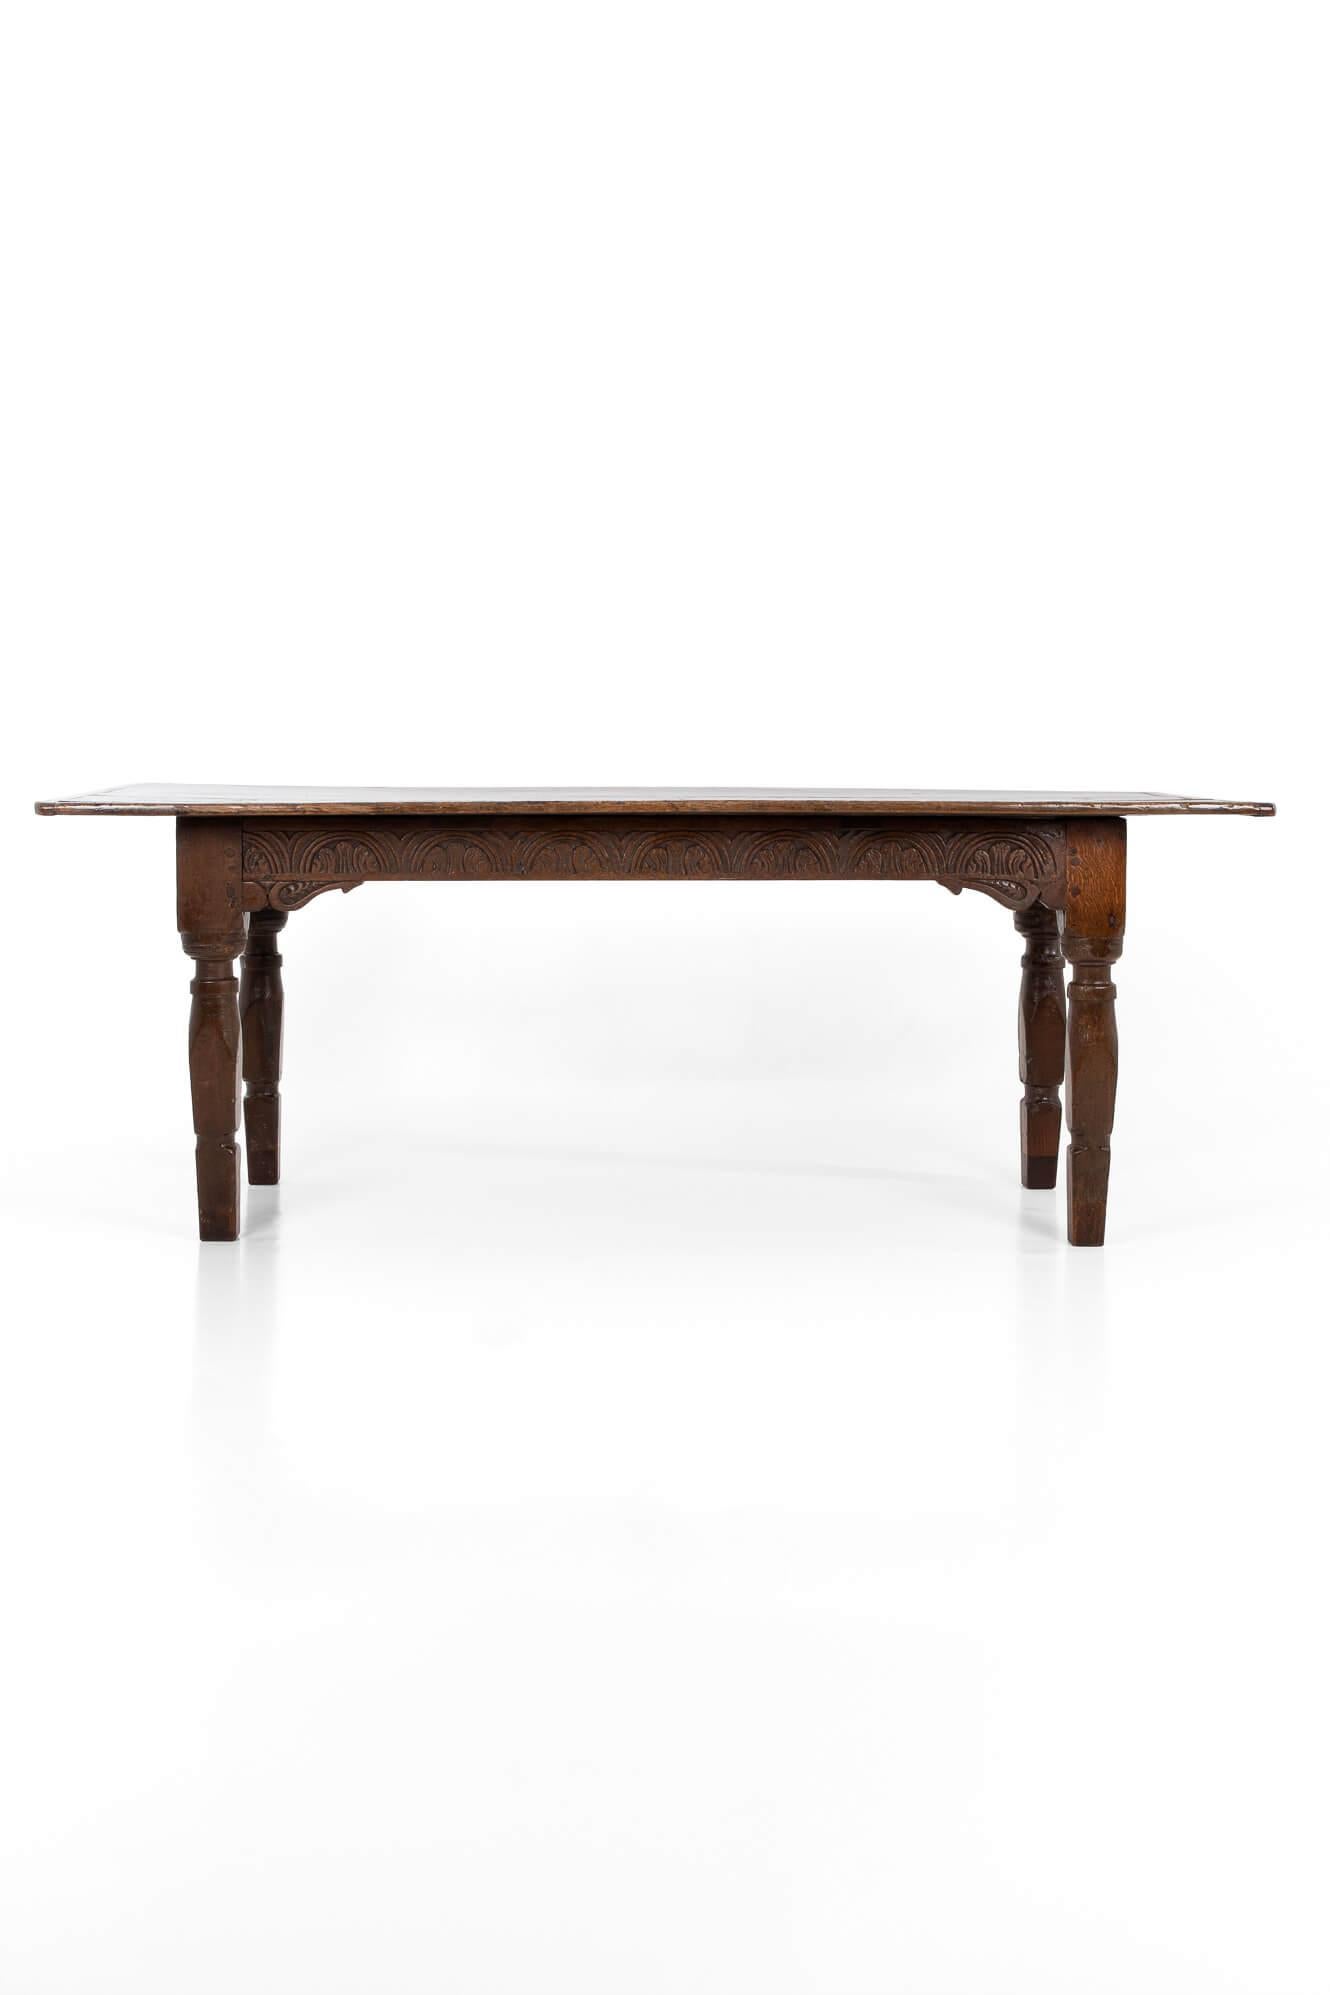 Rustic 17th Century Oak Table For Sale